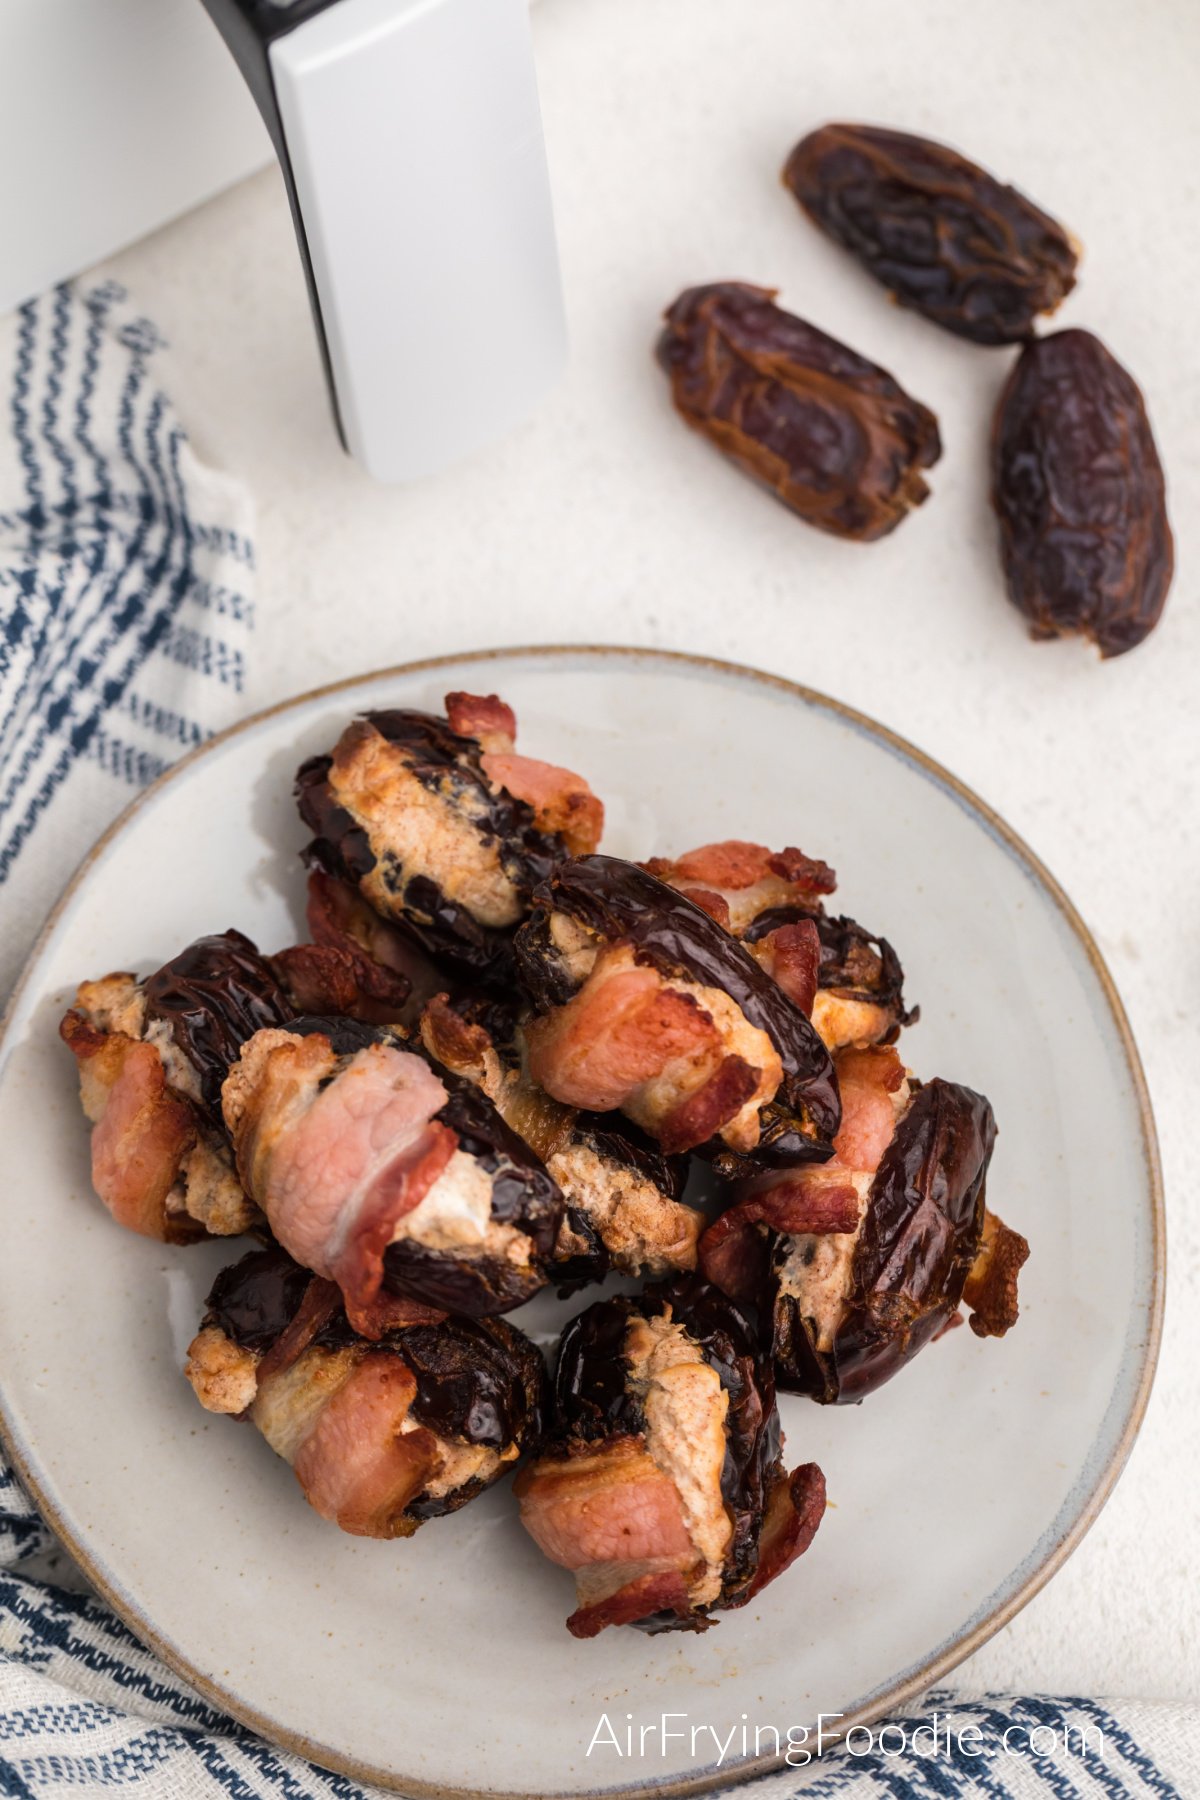 Overhead photo of cream cheesed stuffed bacon wrapped dates on a plate.